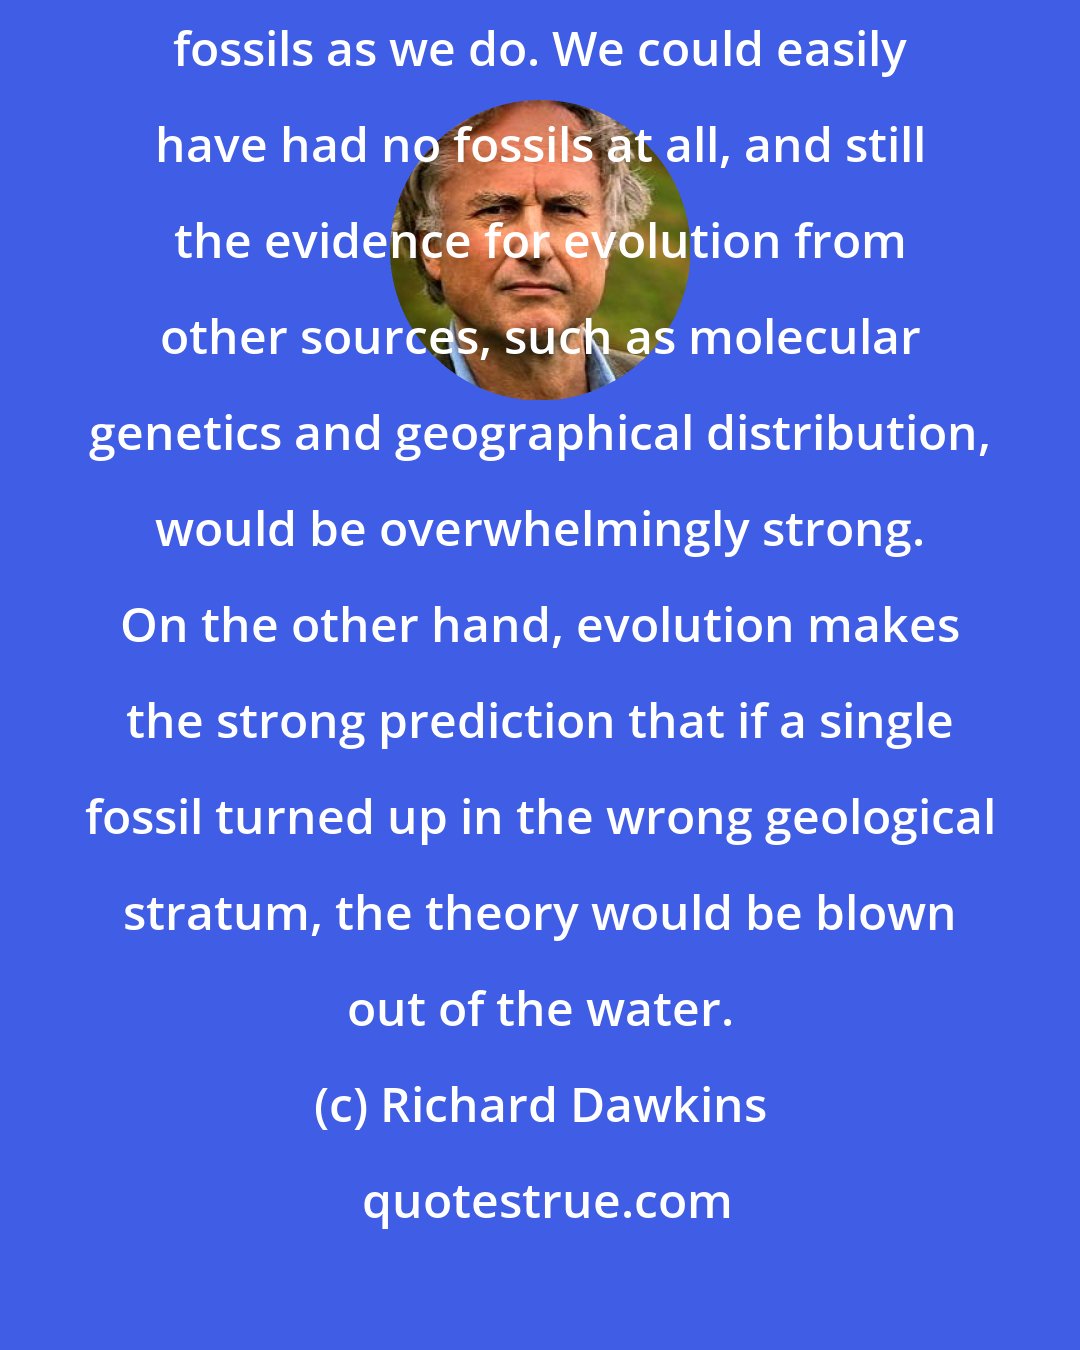 Richard Dawkins: Only a tiny fraction of corpses fossilize, and we are lucky to have as many intermediate fossils as we do. We could easily have had no fossils at all, and still the evidence for evolution from other sources, such as molecular genetics and geographical distribution, would be overwhelmingly strong. On the other hand, evolution makes the strong prediction that if a single fossil turned up in the wrong geological stratum, the theory would be blown out of the water.